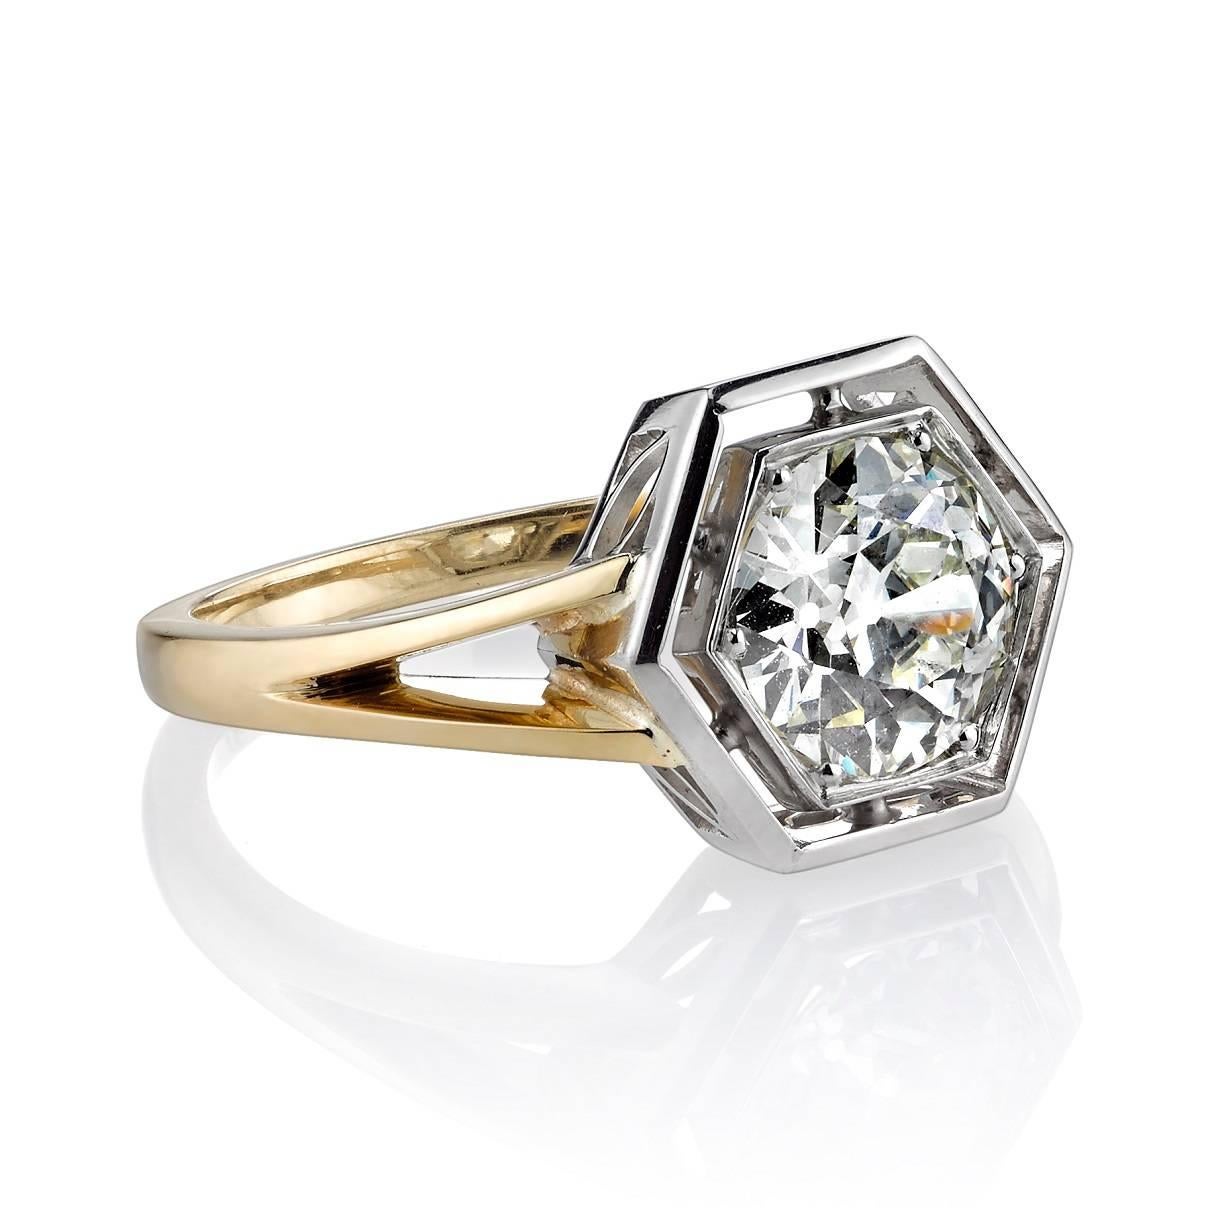 1.40ct K/VS1 EGL certified old European cut diamond set in a handcrafted platinum and 18k yellow gold mounting. This Art Deco inspired setting a beautiful two toned setting. 